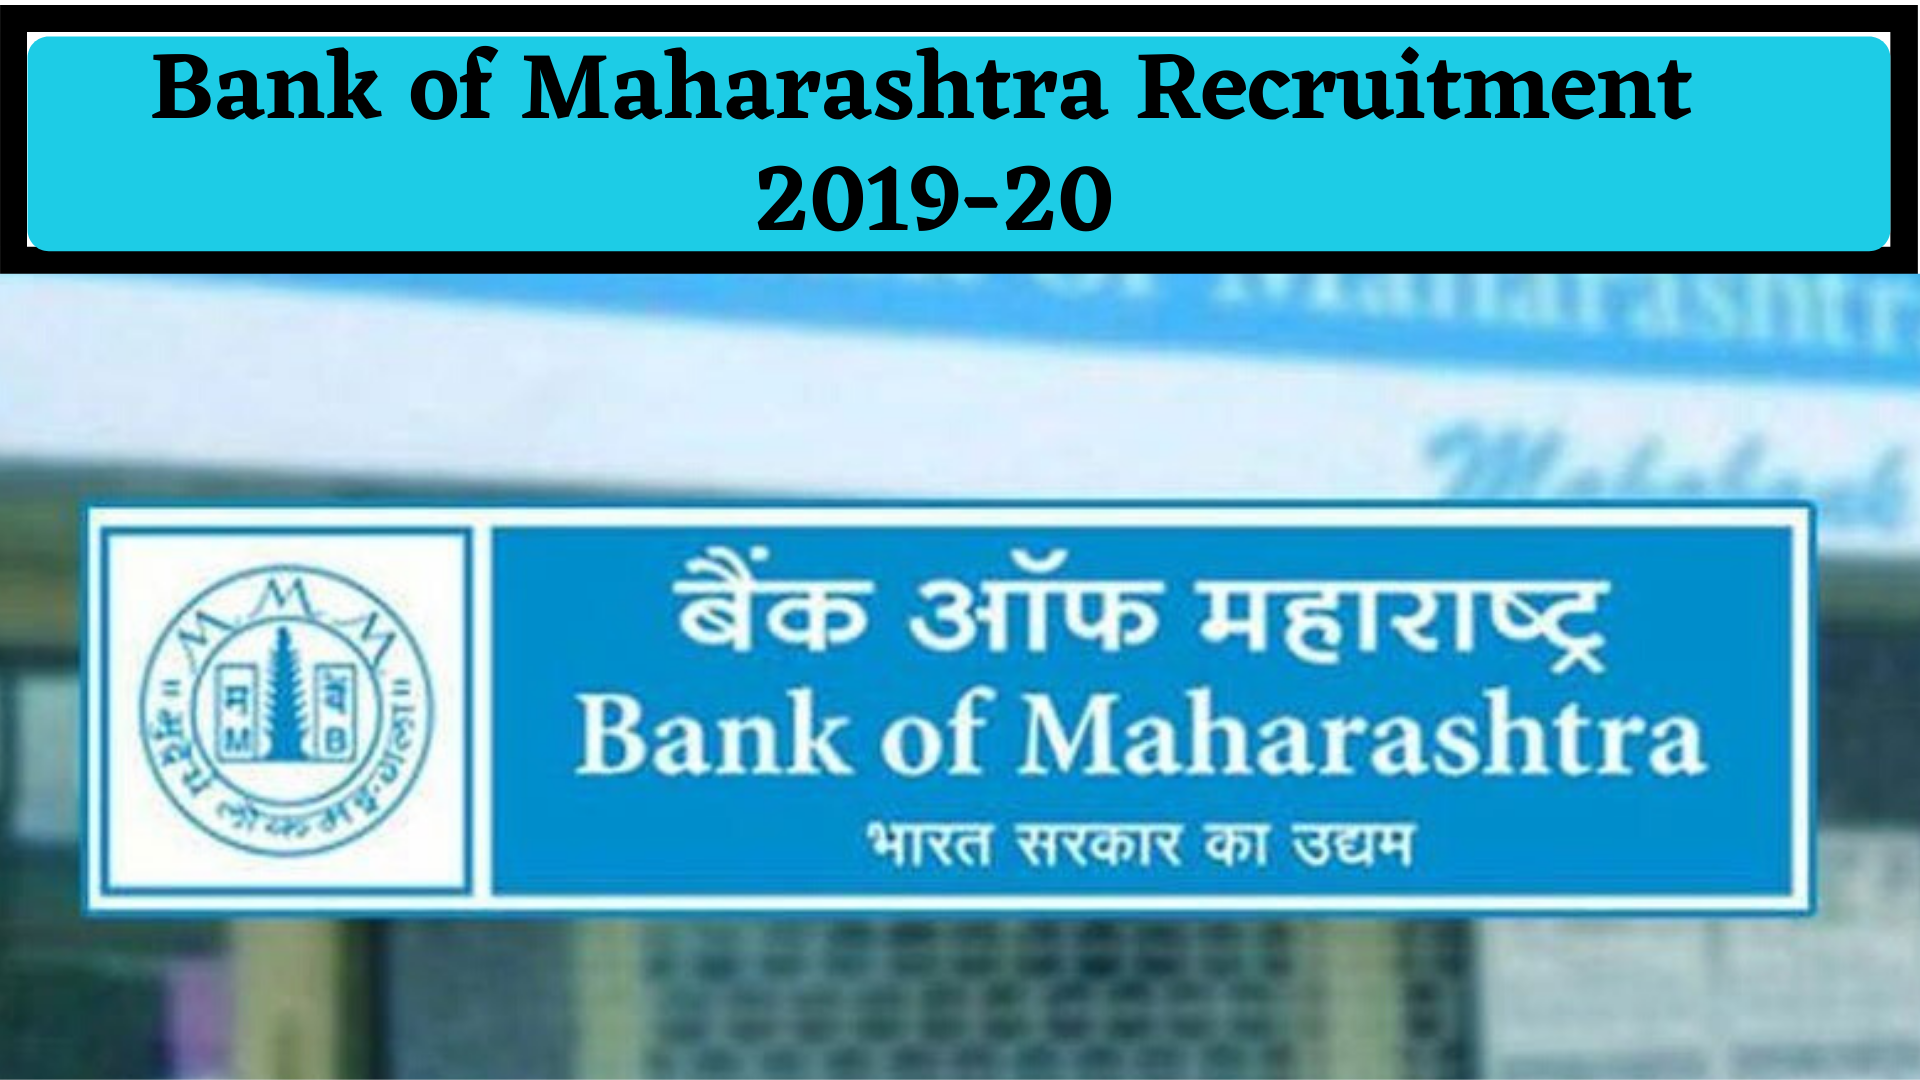 Bank of Maharashtra Recruitment 2019: 350 Vacancies | Apply Online Here. ... Bank of Maharashtra Recruitment 2019: Bank of Maharastra Recruitment 2019 Notification has released officially!!! Details regarding the vacancy, eligibility criteria & apply online are available at Bank of ...